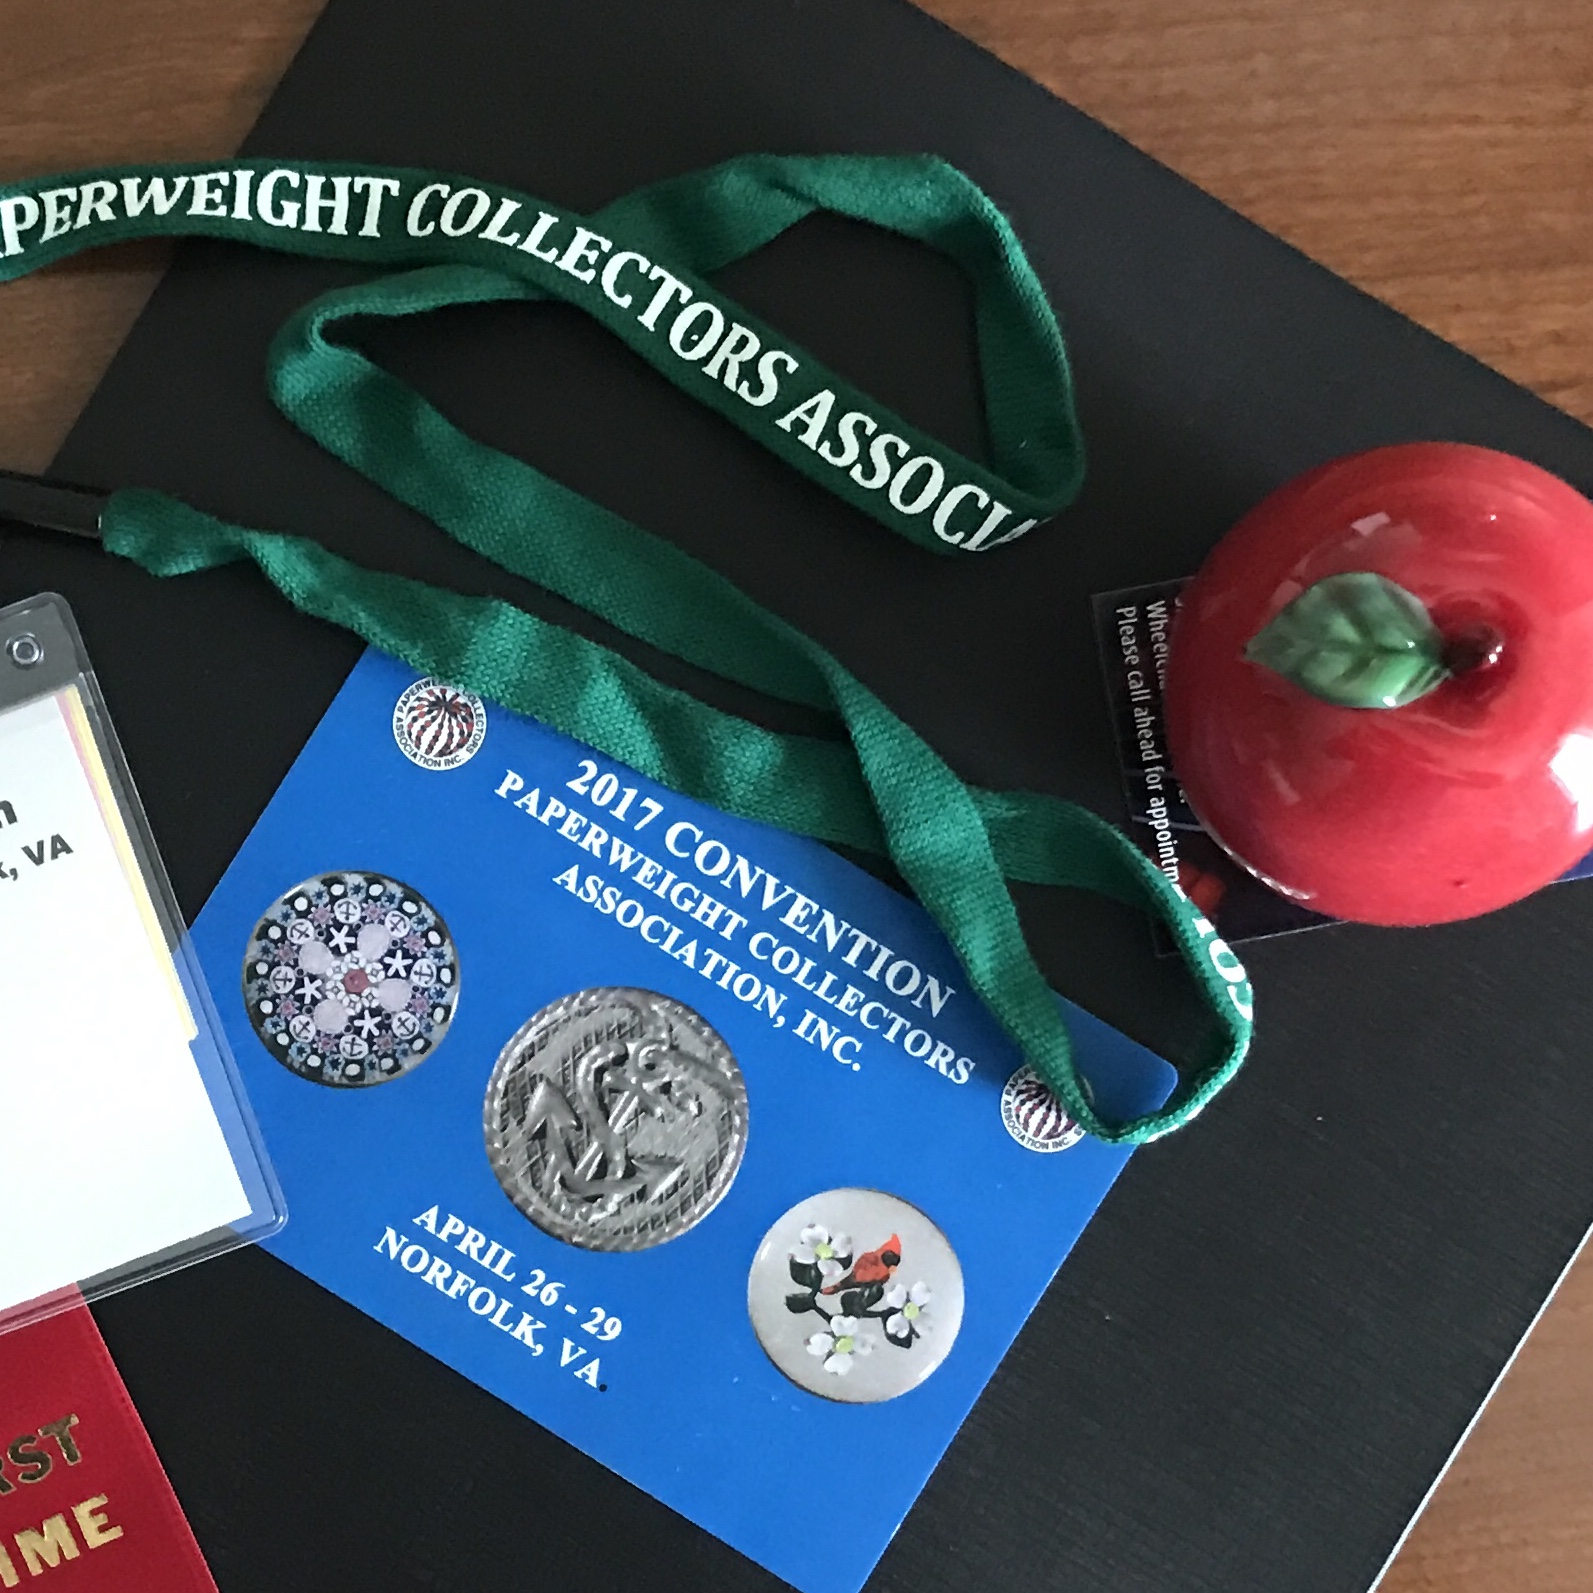 2017 Norfolk Convention Badge, Apple Paperweight and Folder